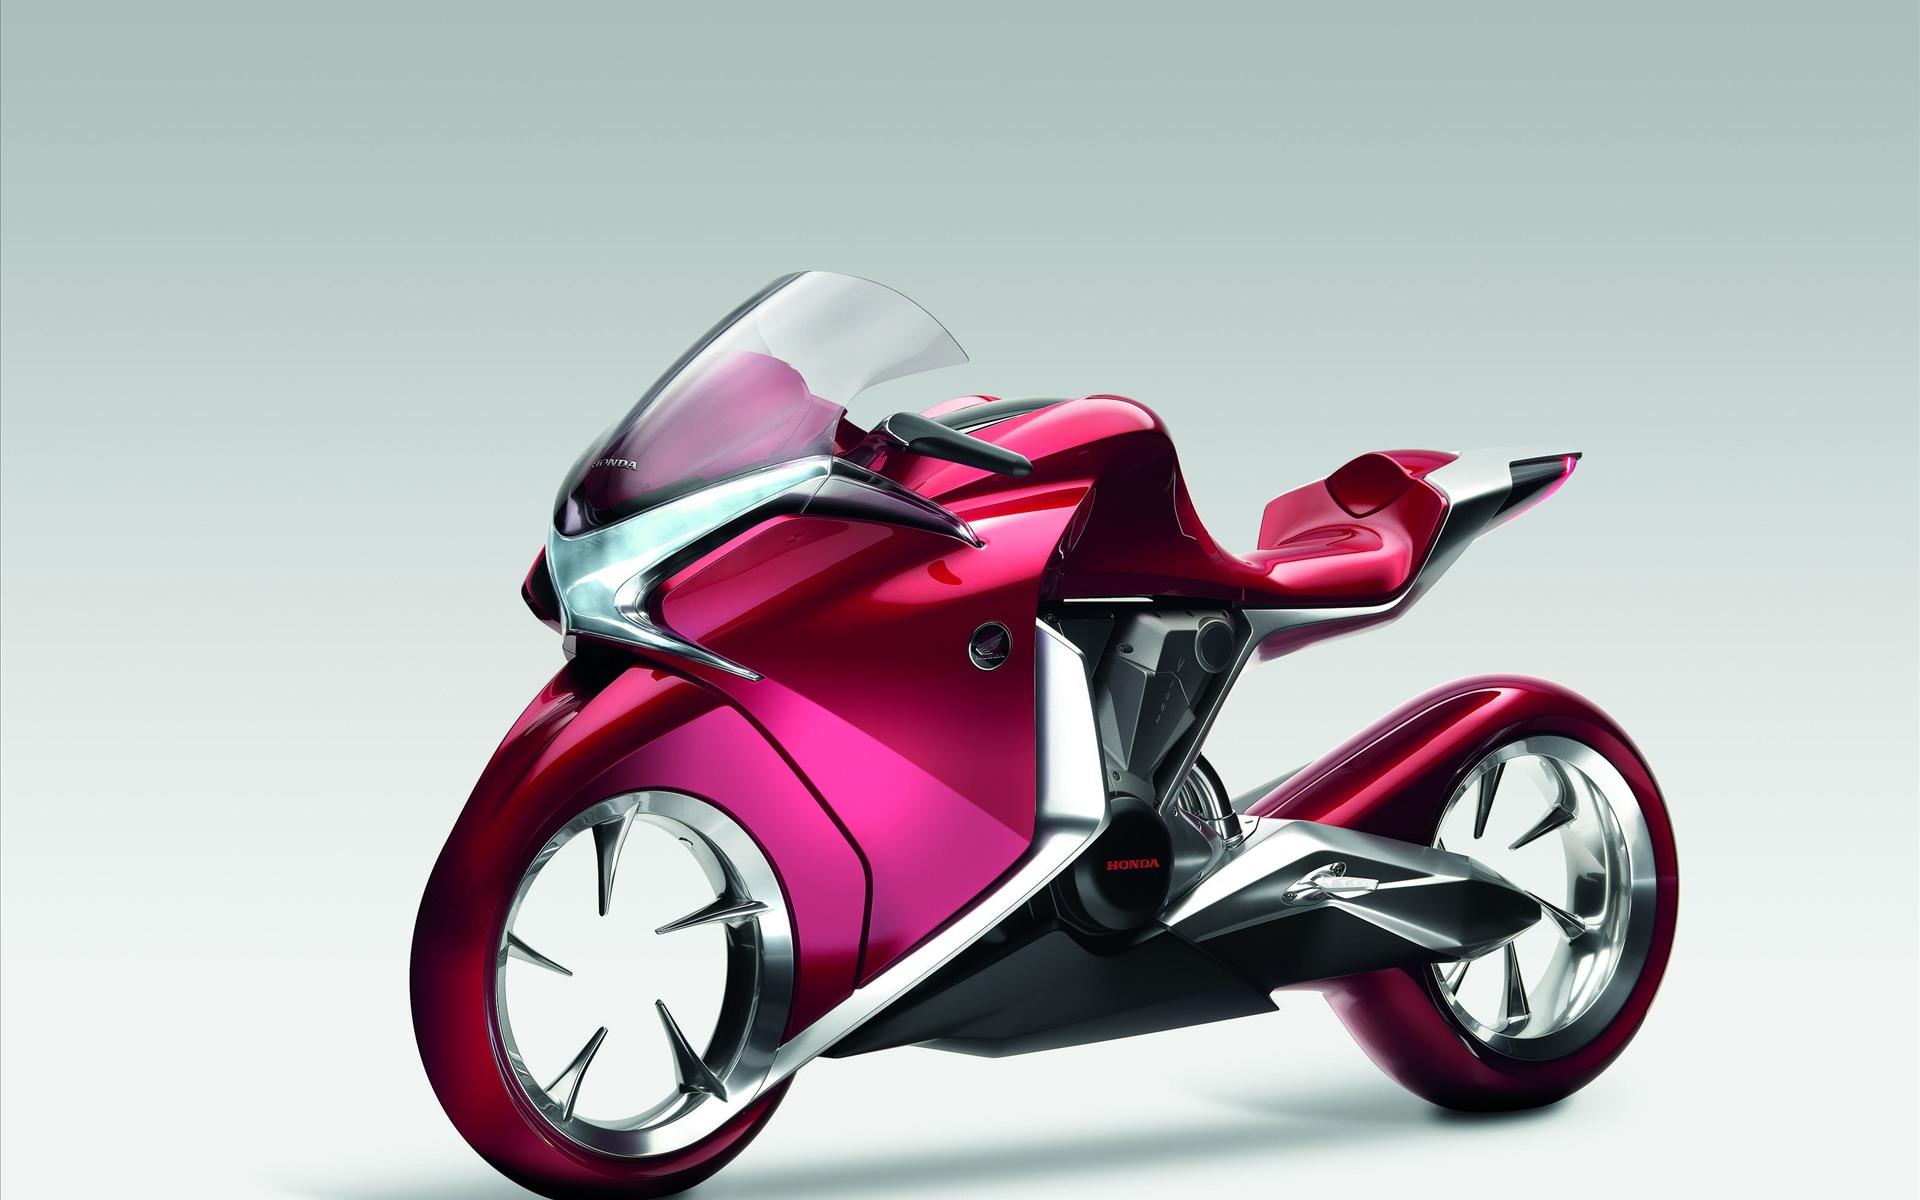 Download Honda v4 concept widescreen bike - Bikes wallpaper for your mobile  cell phone